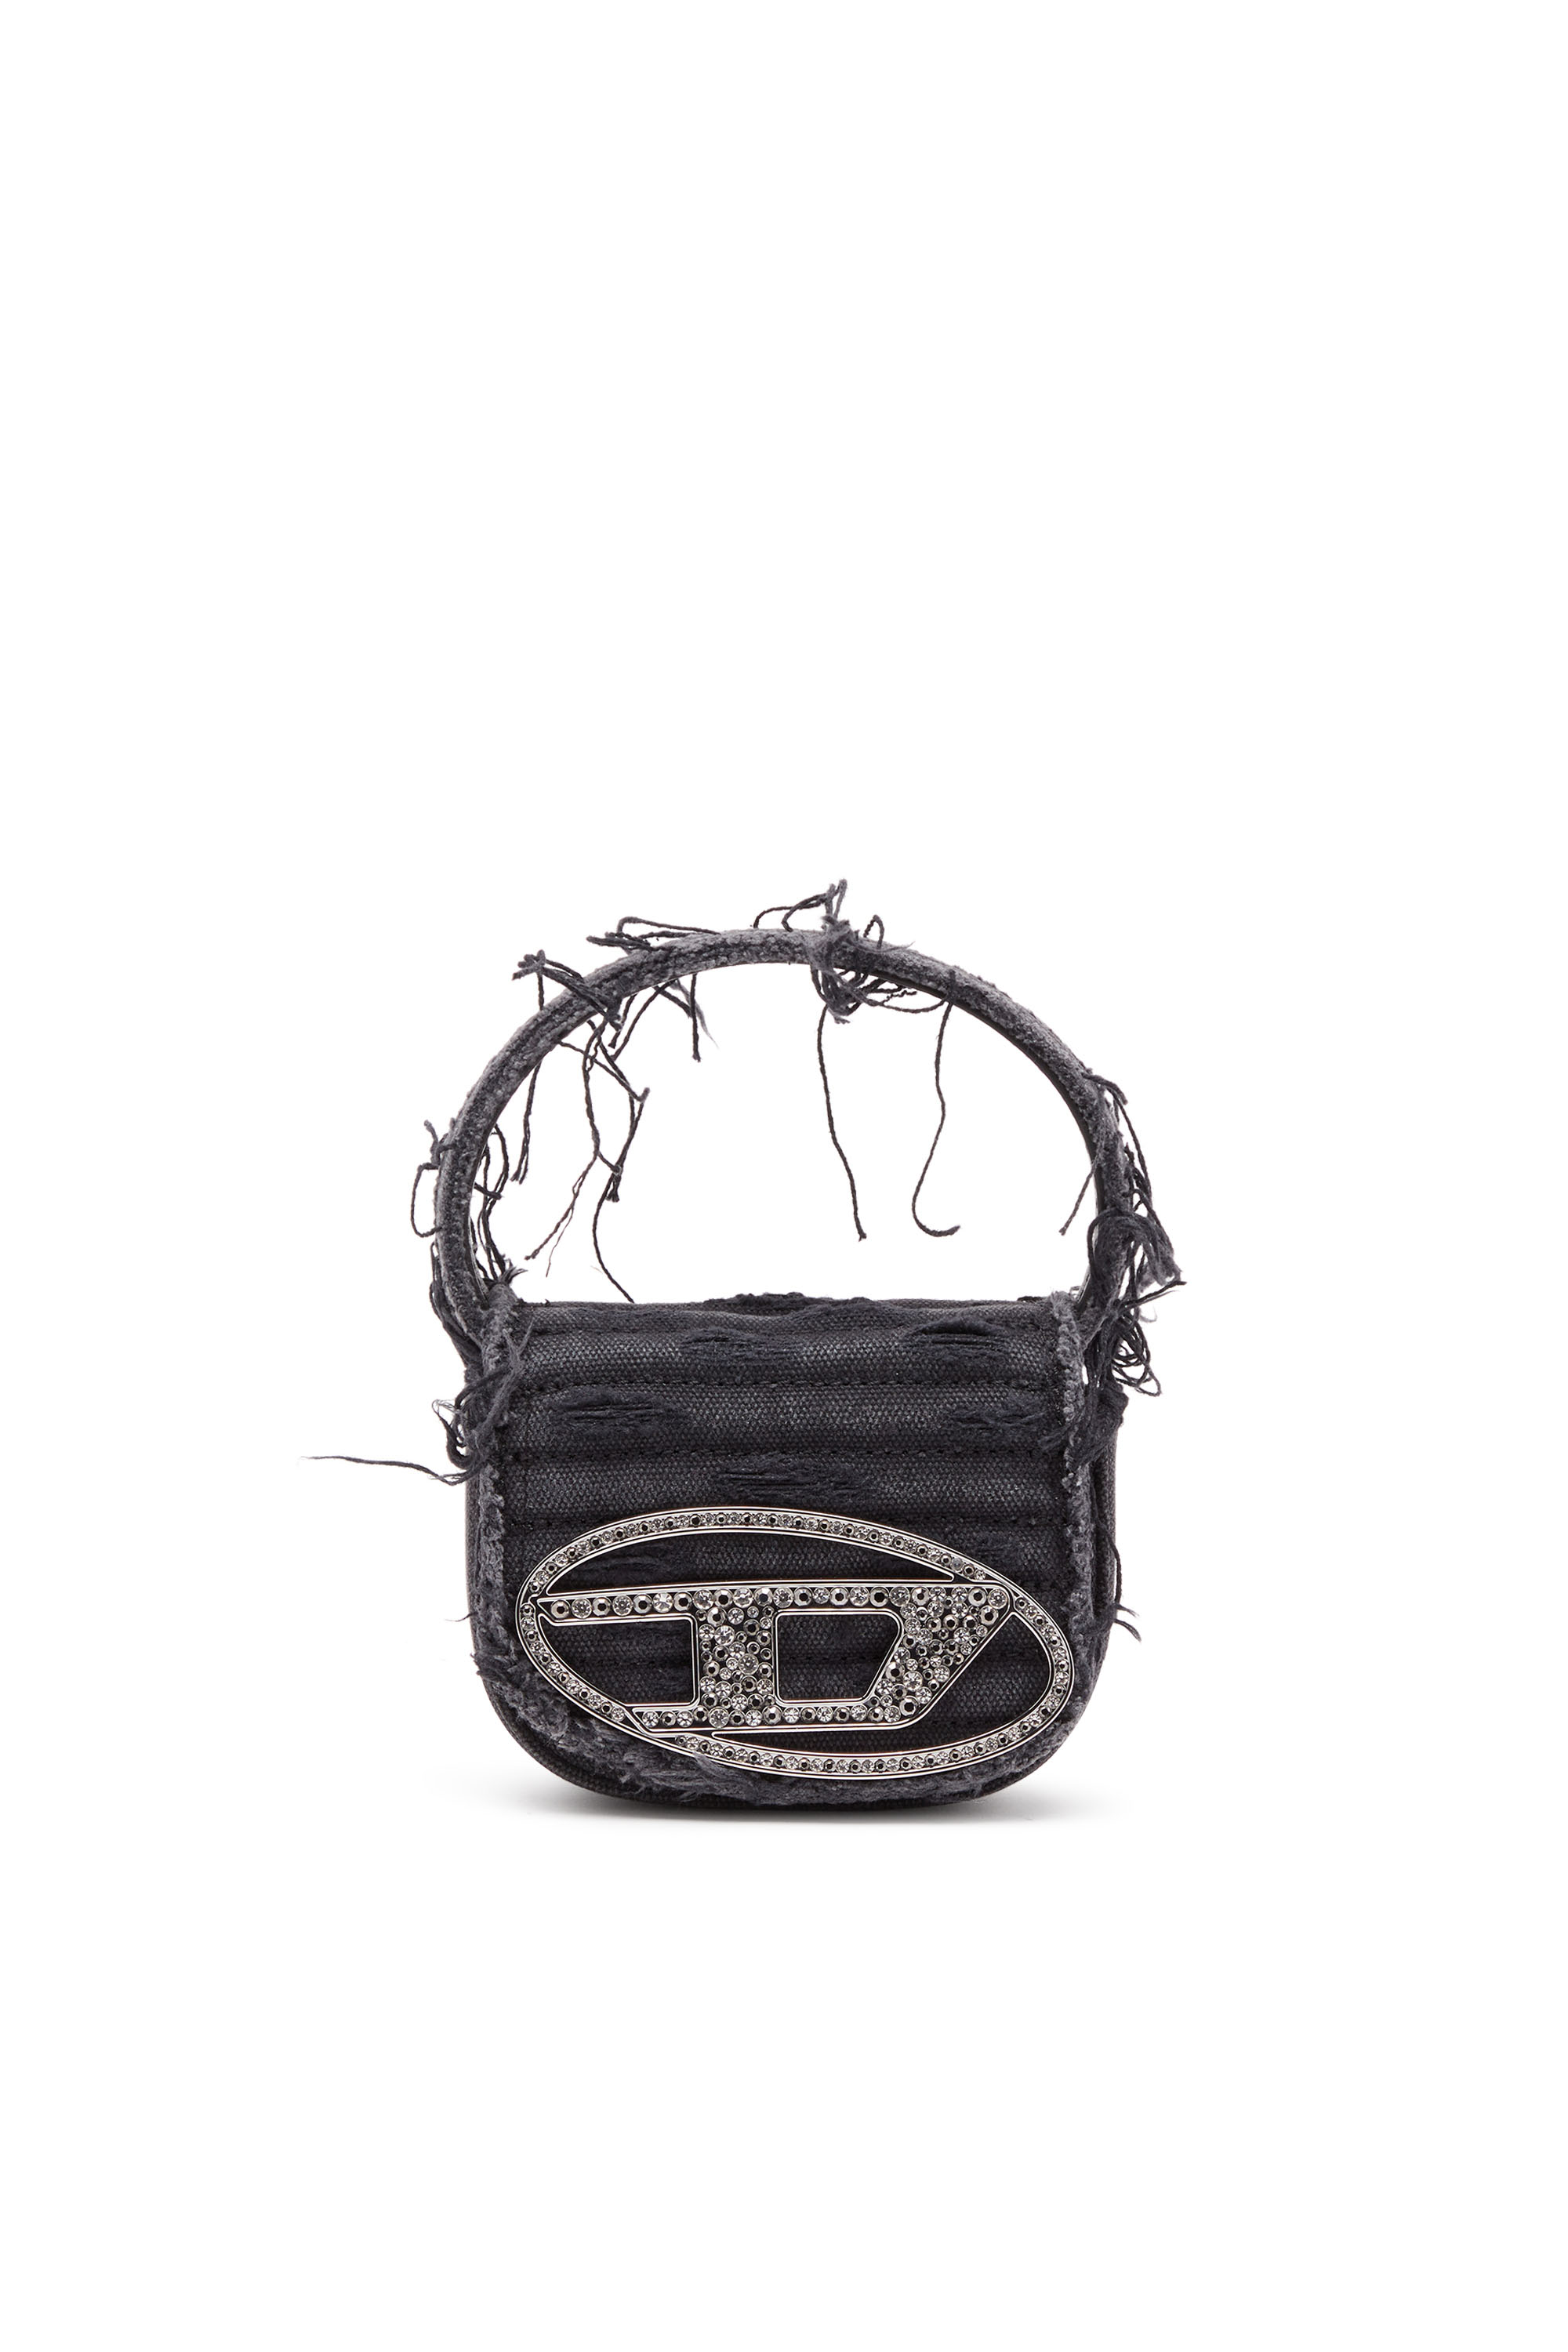 Diesel - 1DR XS, Woman 1DR XS-Iconic mini bag in canvas and leather in Black - Image 1